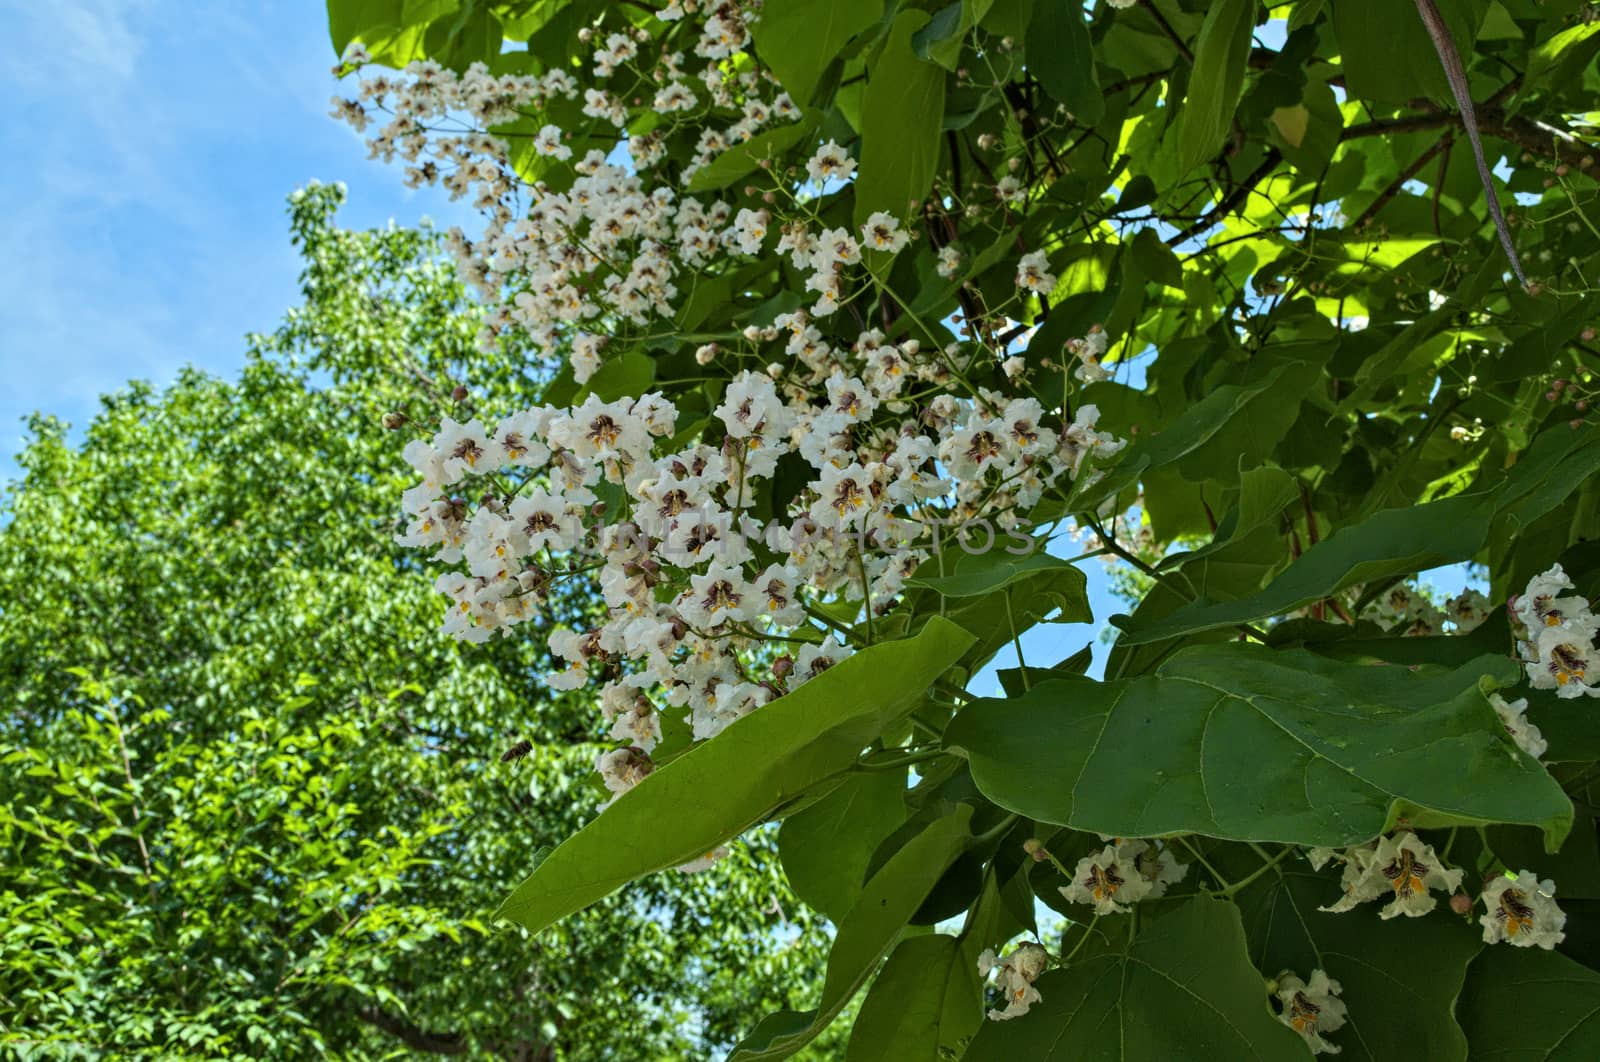 Catalpa tree blooming with big clusters of white flowers